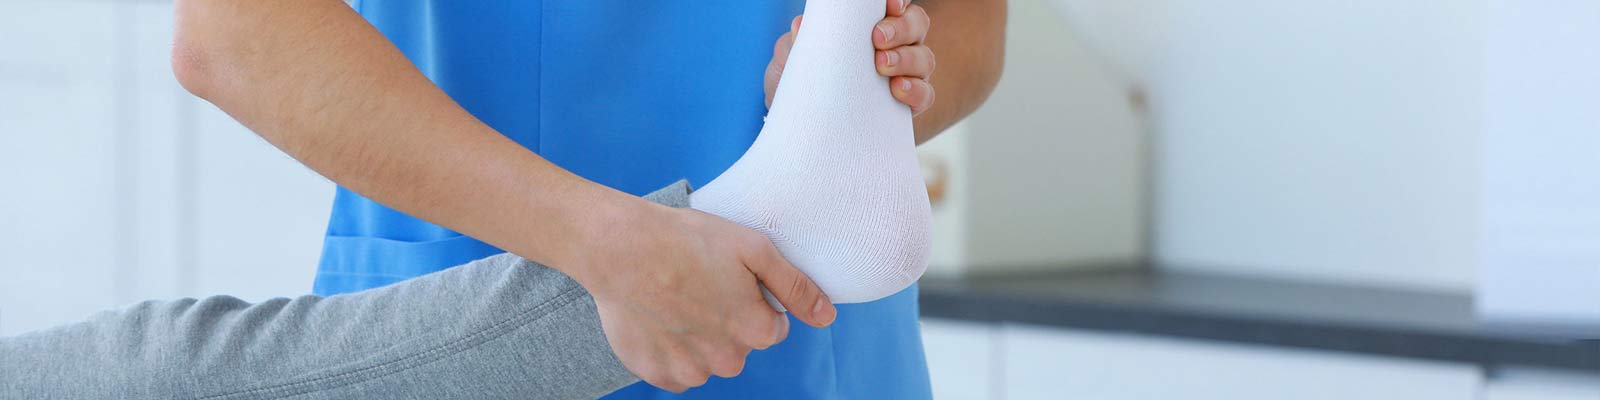 nurse lifting a bandaged foot to prevent bed sores